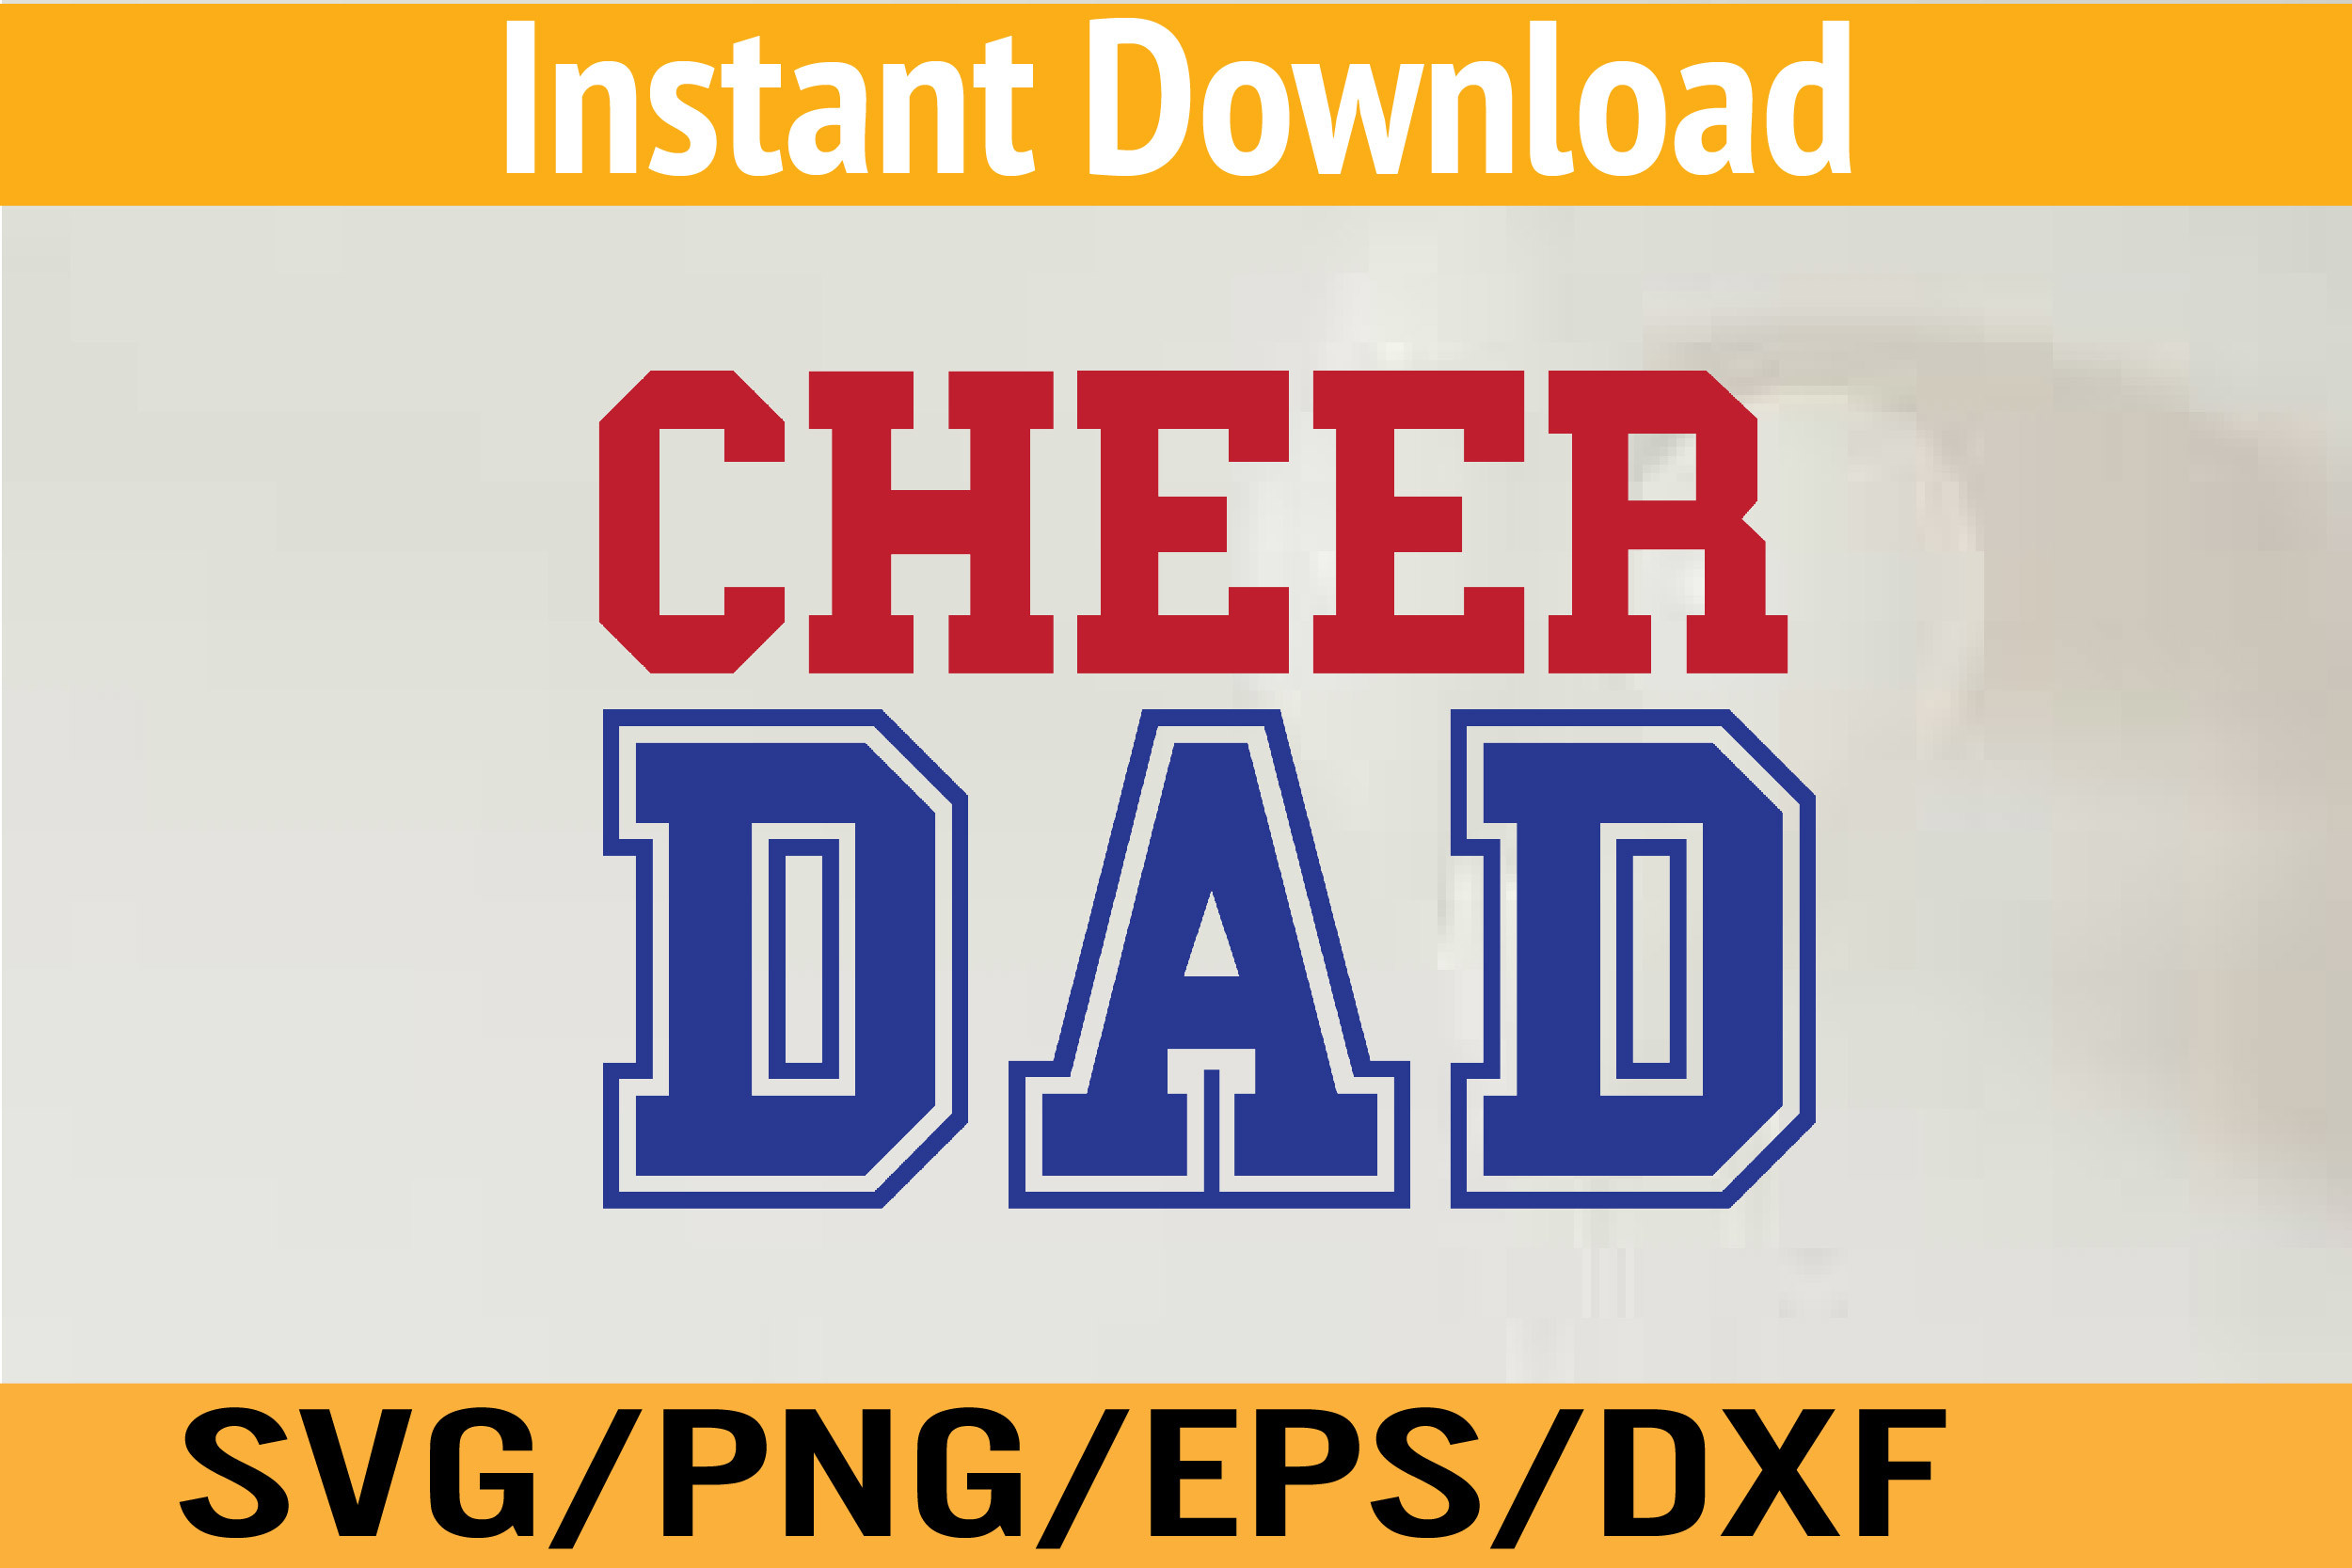 Cheer 1_Cheer Dad Svg, Eps, Png, Dxf Graphic by ariadnetms · Creative ...